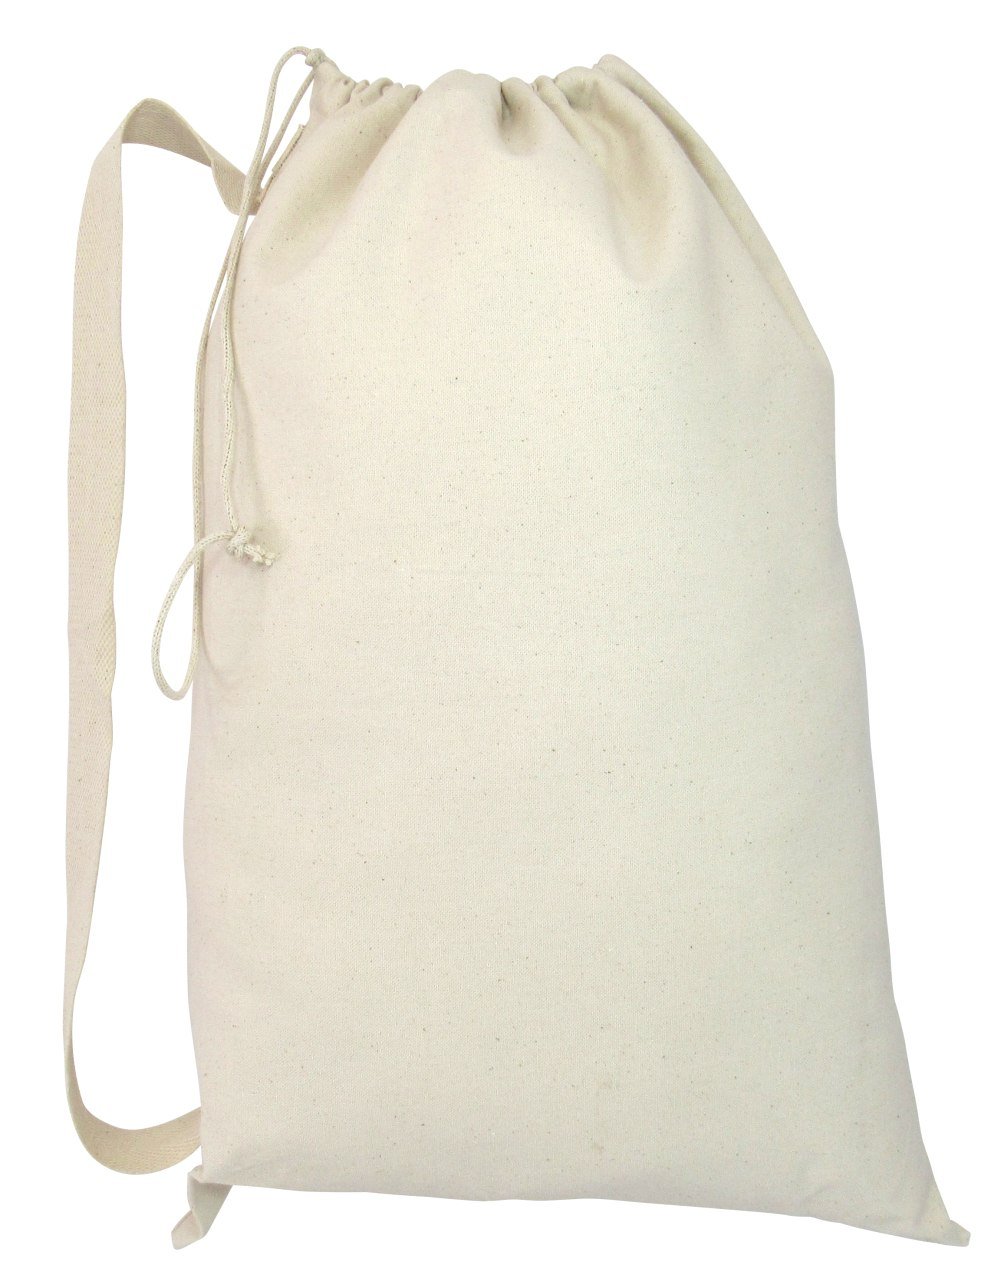 Closeout Wholesale Heavy Canvas Laundry Bags W/Shoulder Strap (Small-Med-Large)